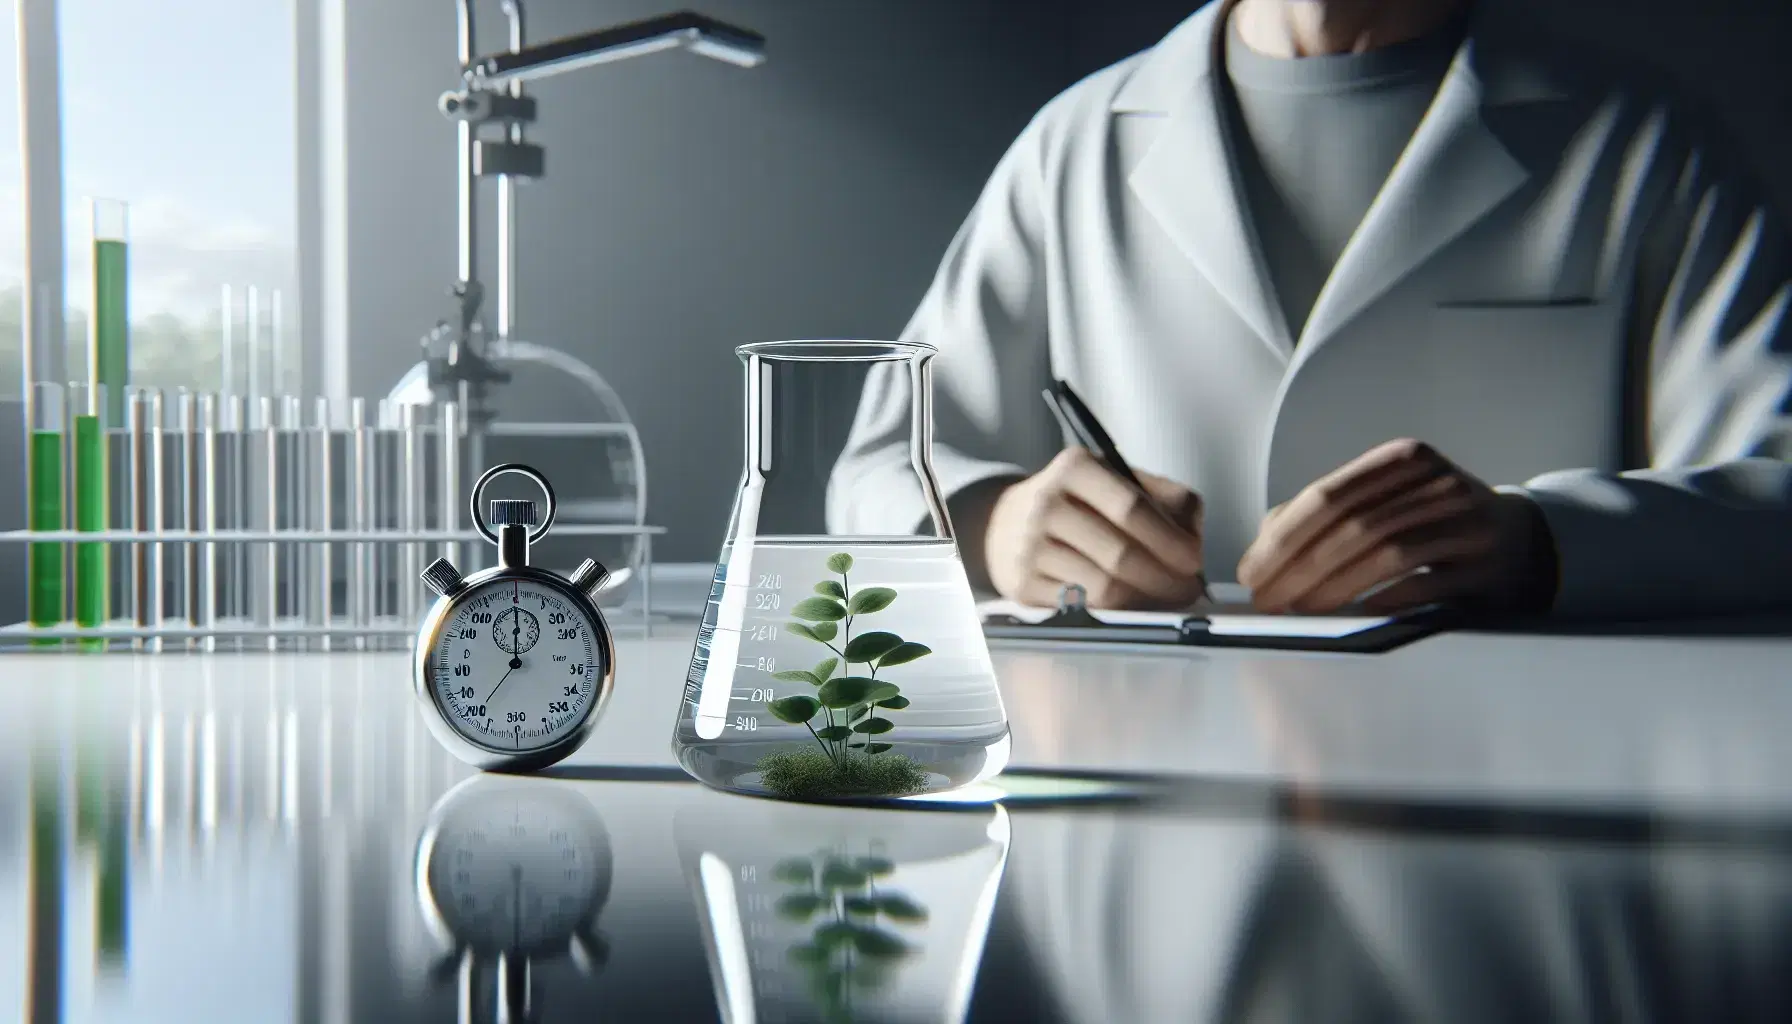 Laboratory setting with a beaker of clear liquid, a stationary stopwatch, a focused scientist with a clipboard, and a small green potted plant.